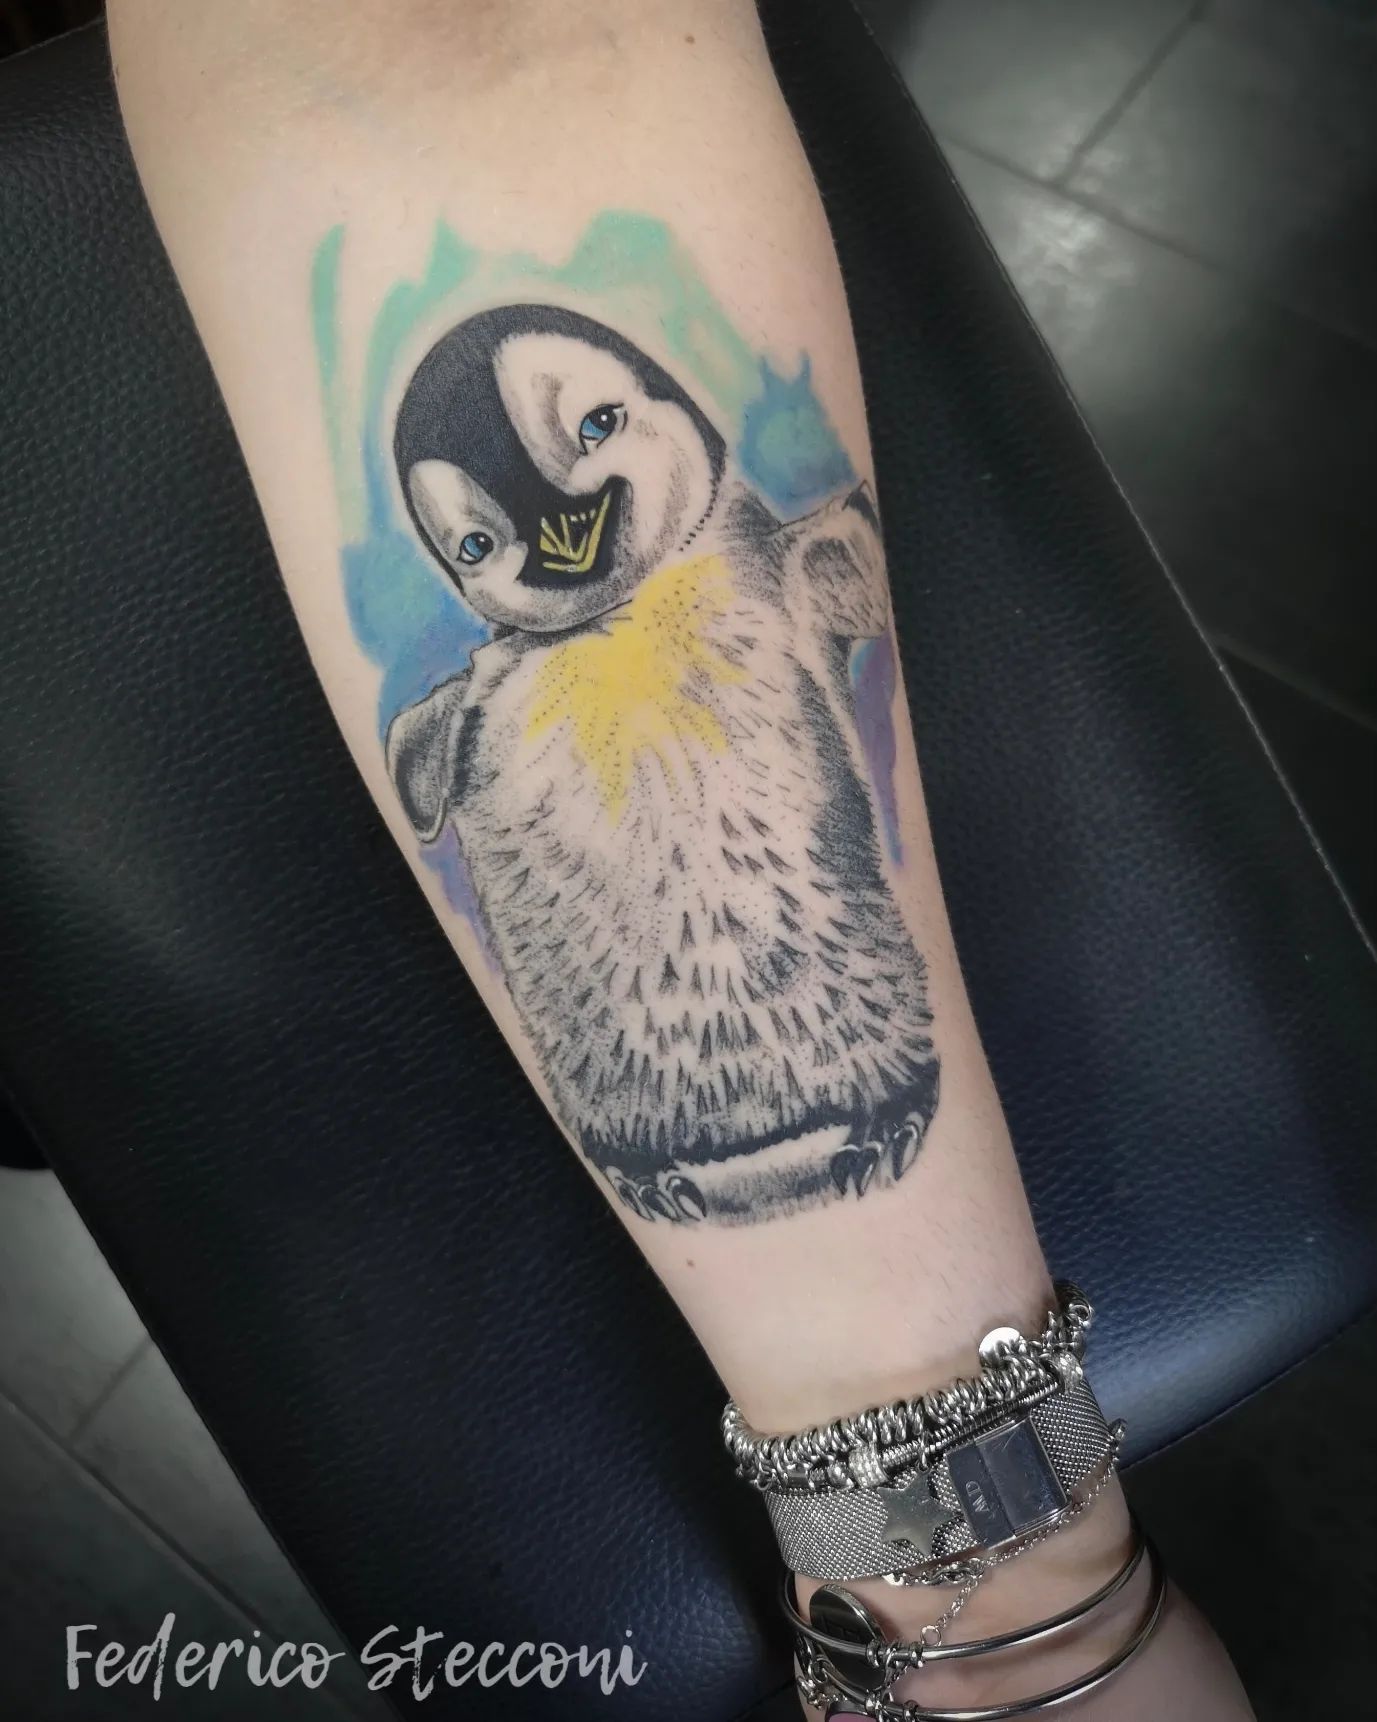 Being a popular computer-animated comedy film, Happy Feet is all about penguins! If you like the movie, you can get a tattoo of one of the penguins in it.